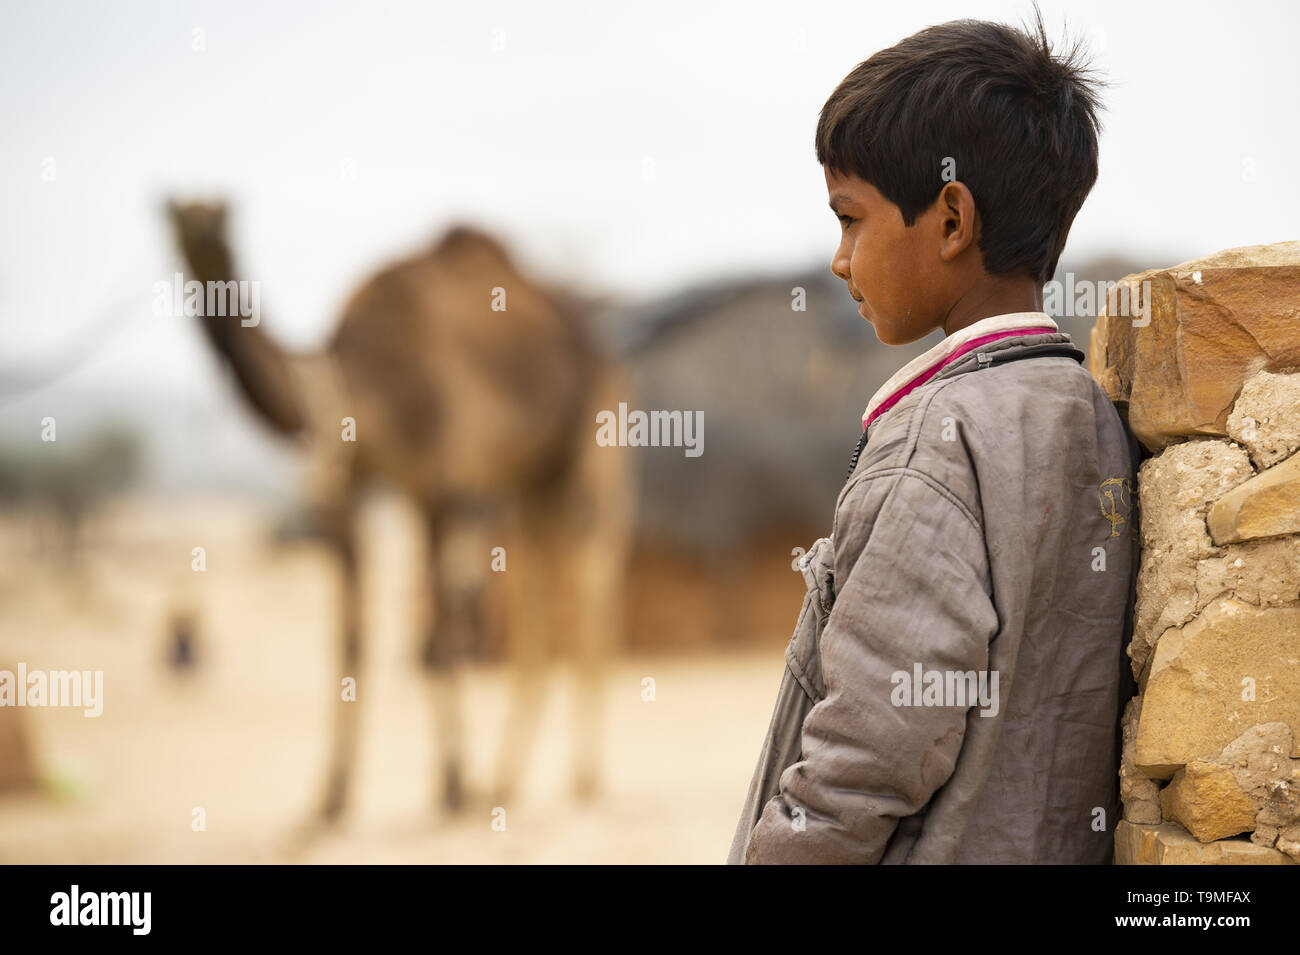 A child is leaning against a wall while a camel is in the background. Stock Photo